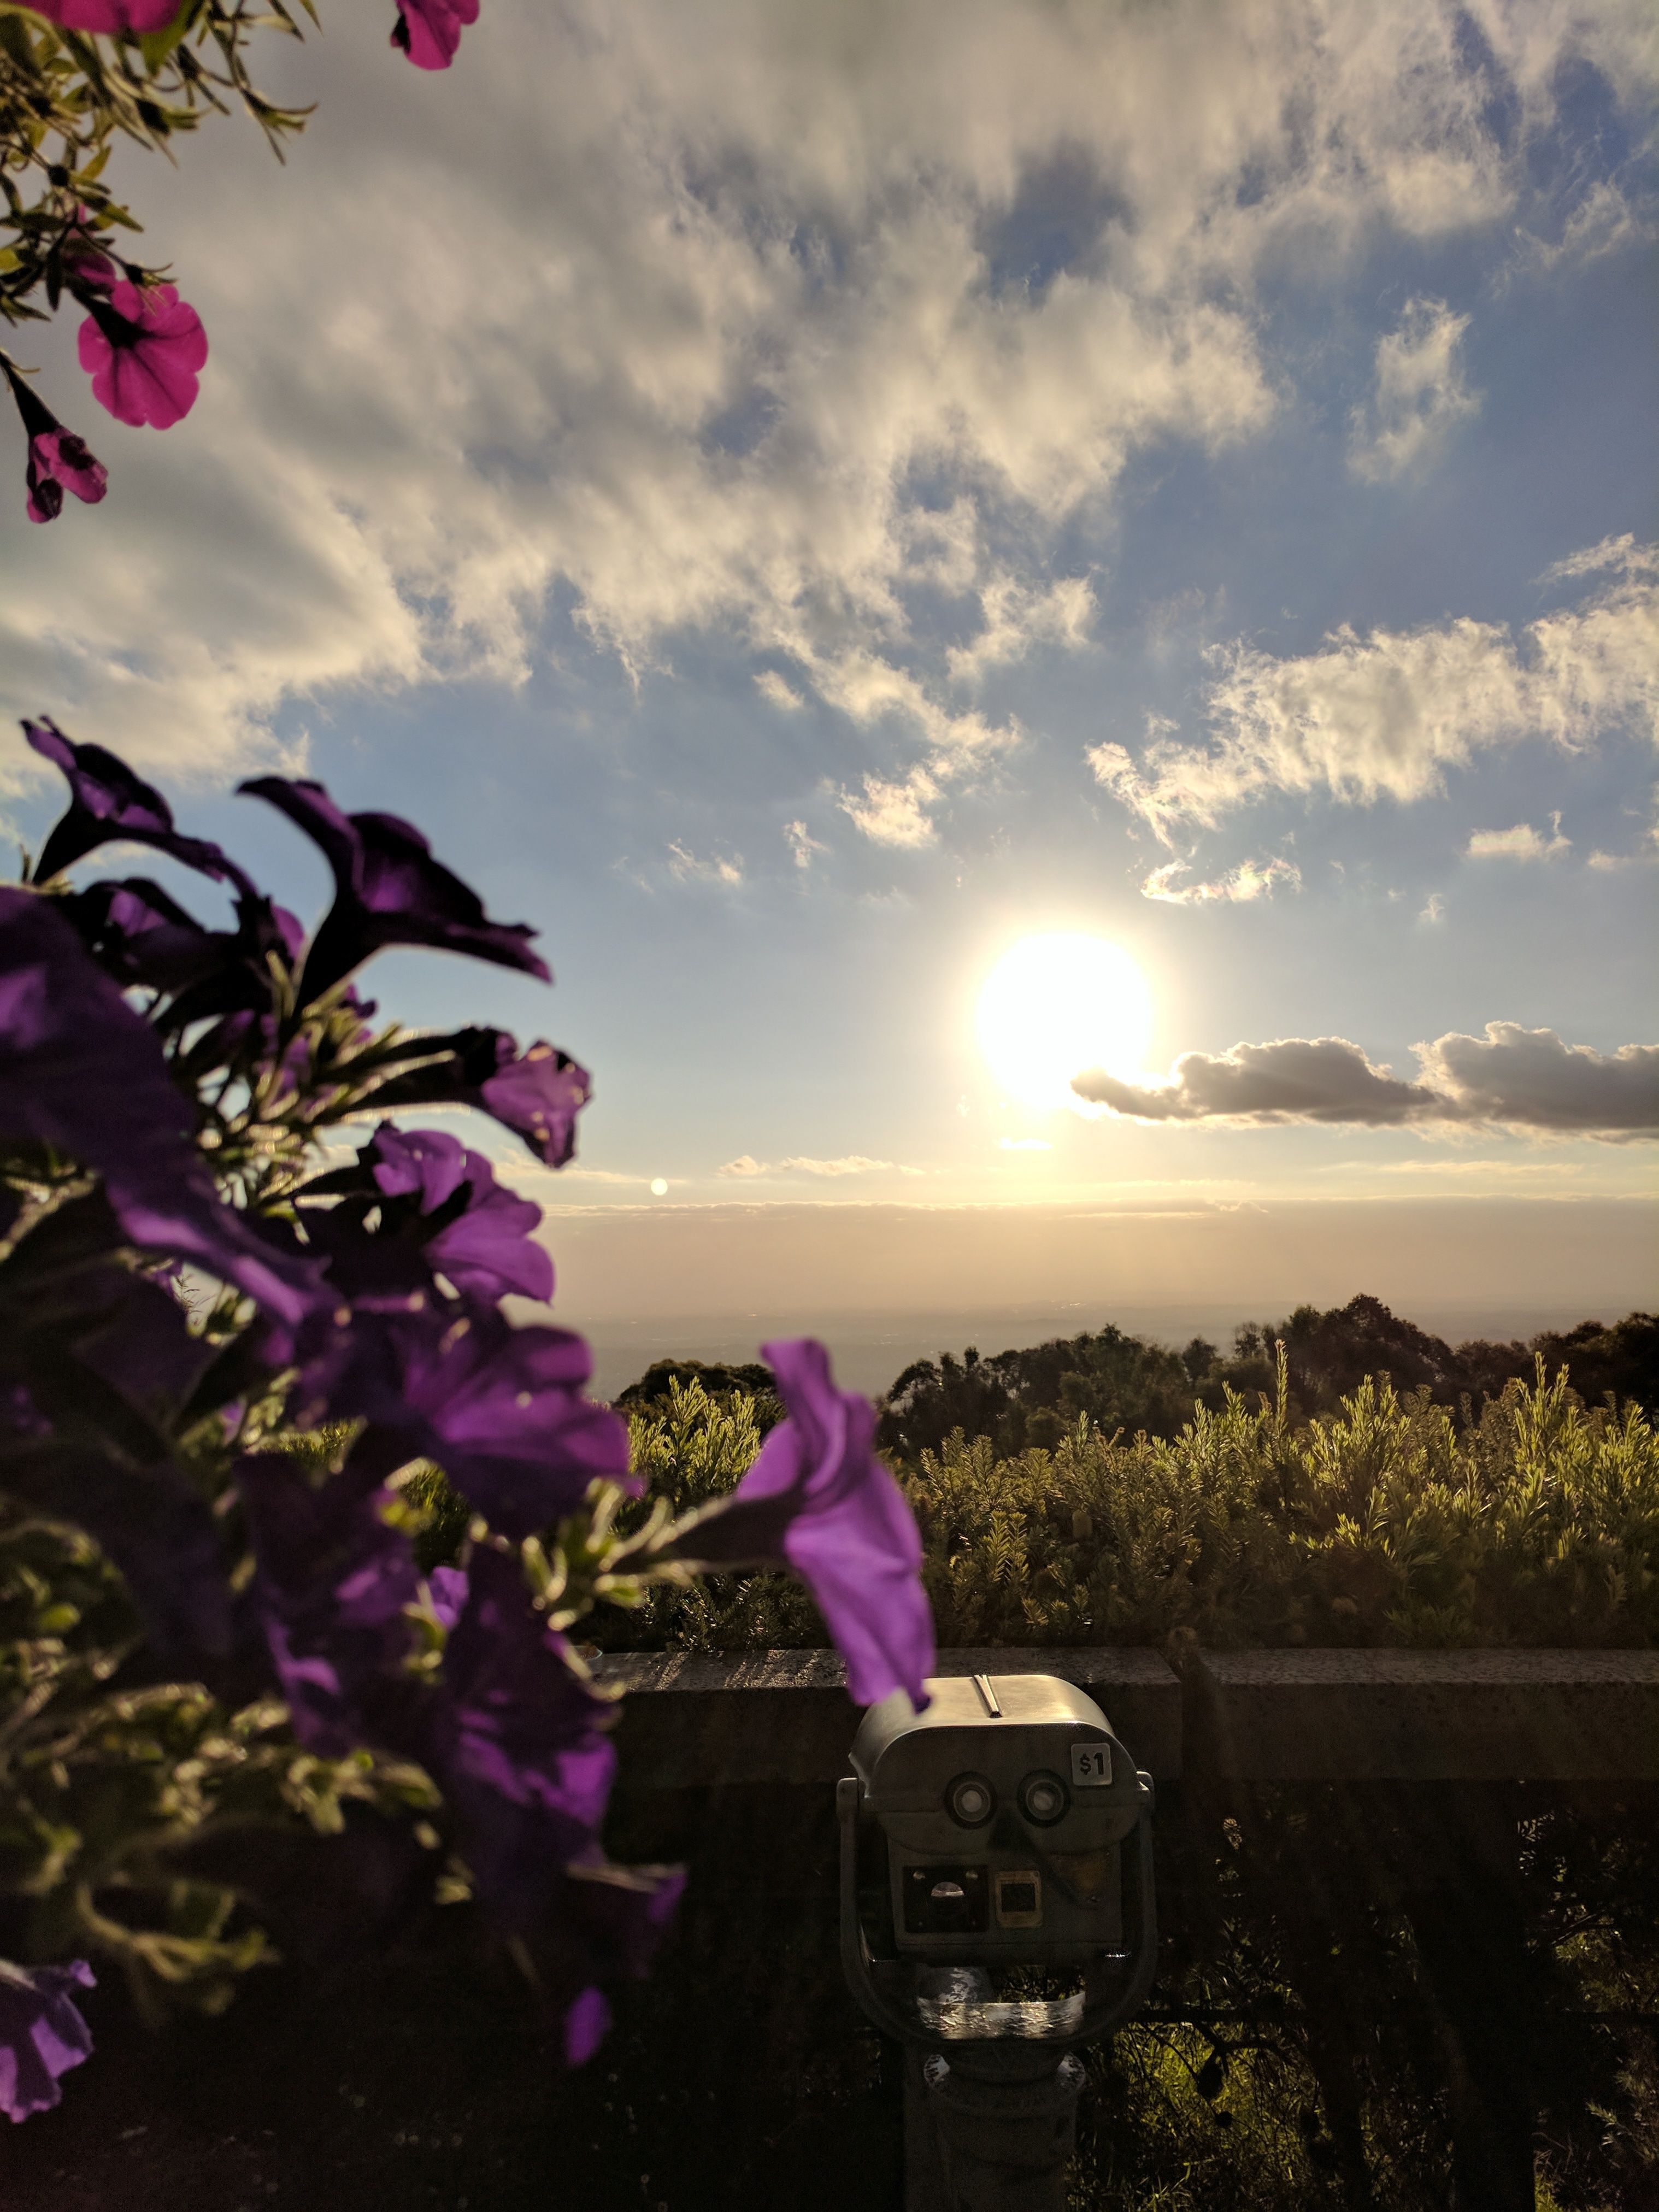 Caption: Violet flowers and sunset in background